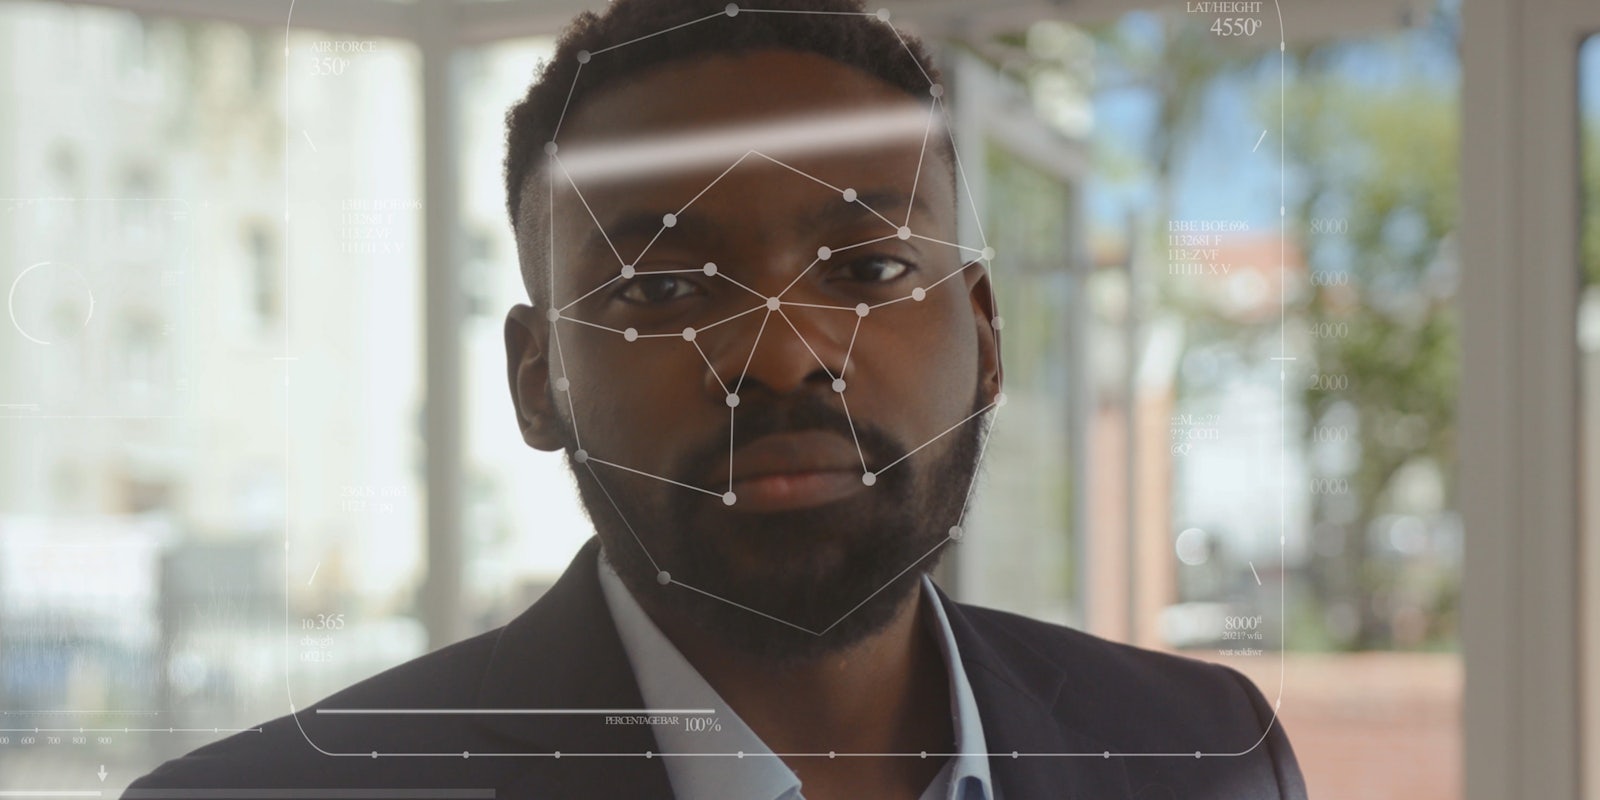 A man being scanned with facial recognition technology.